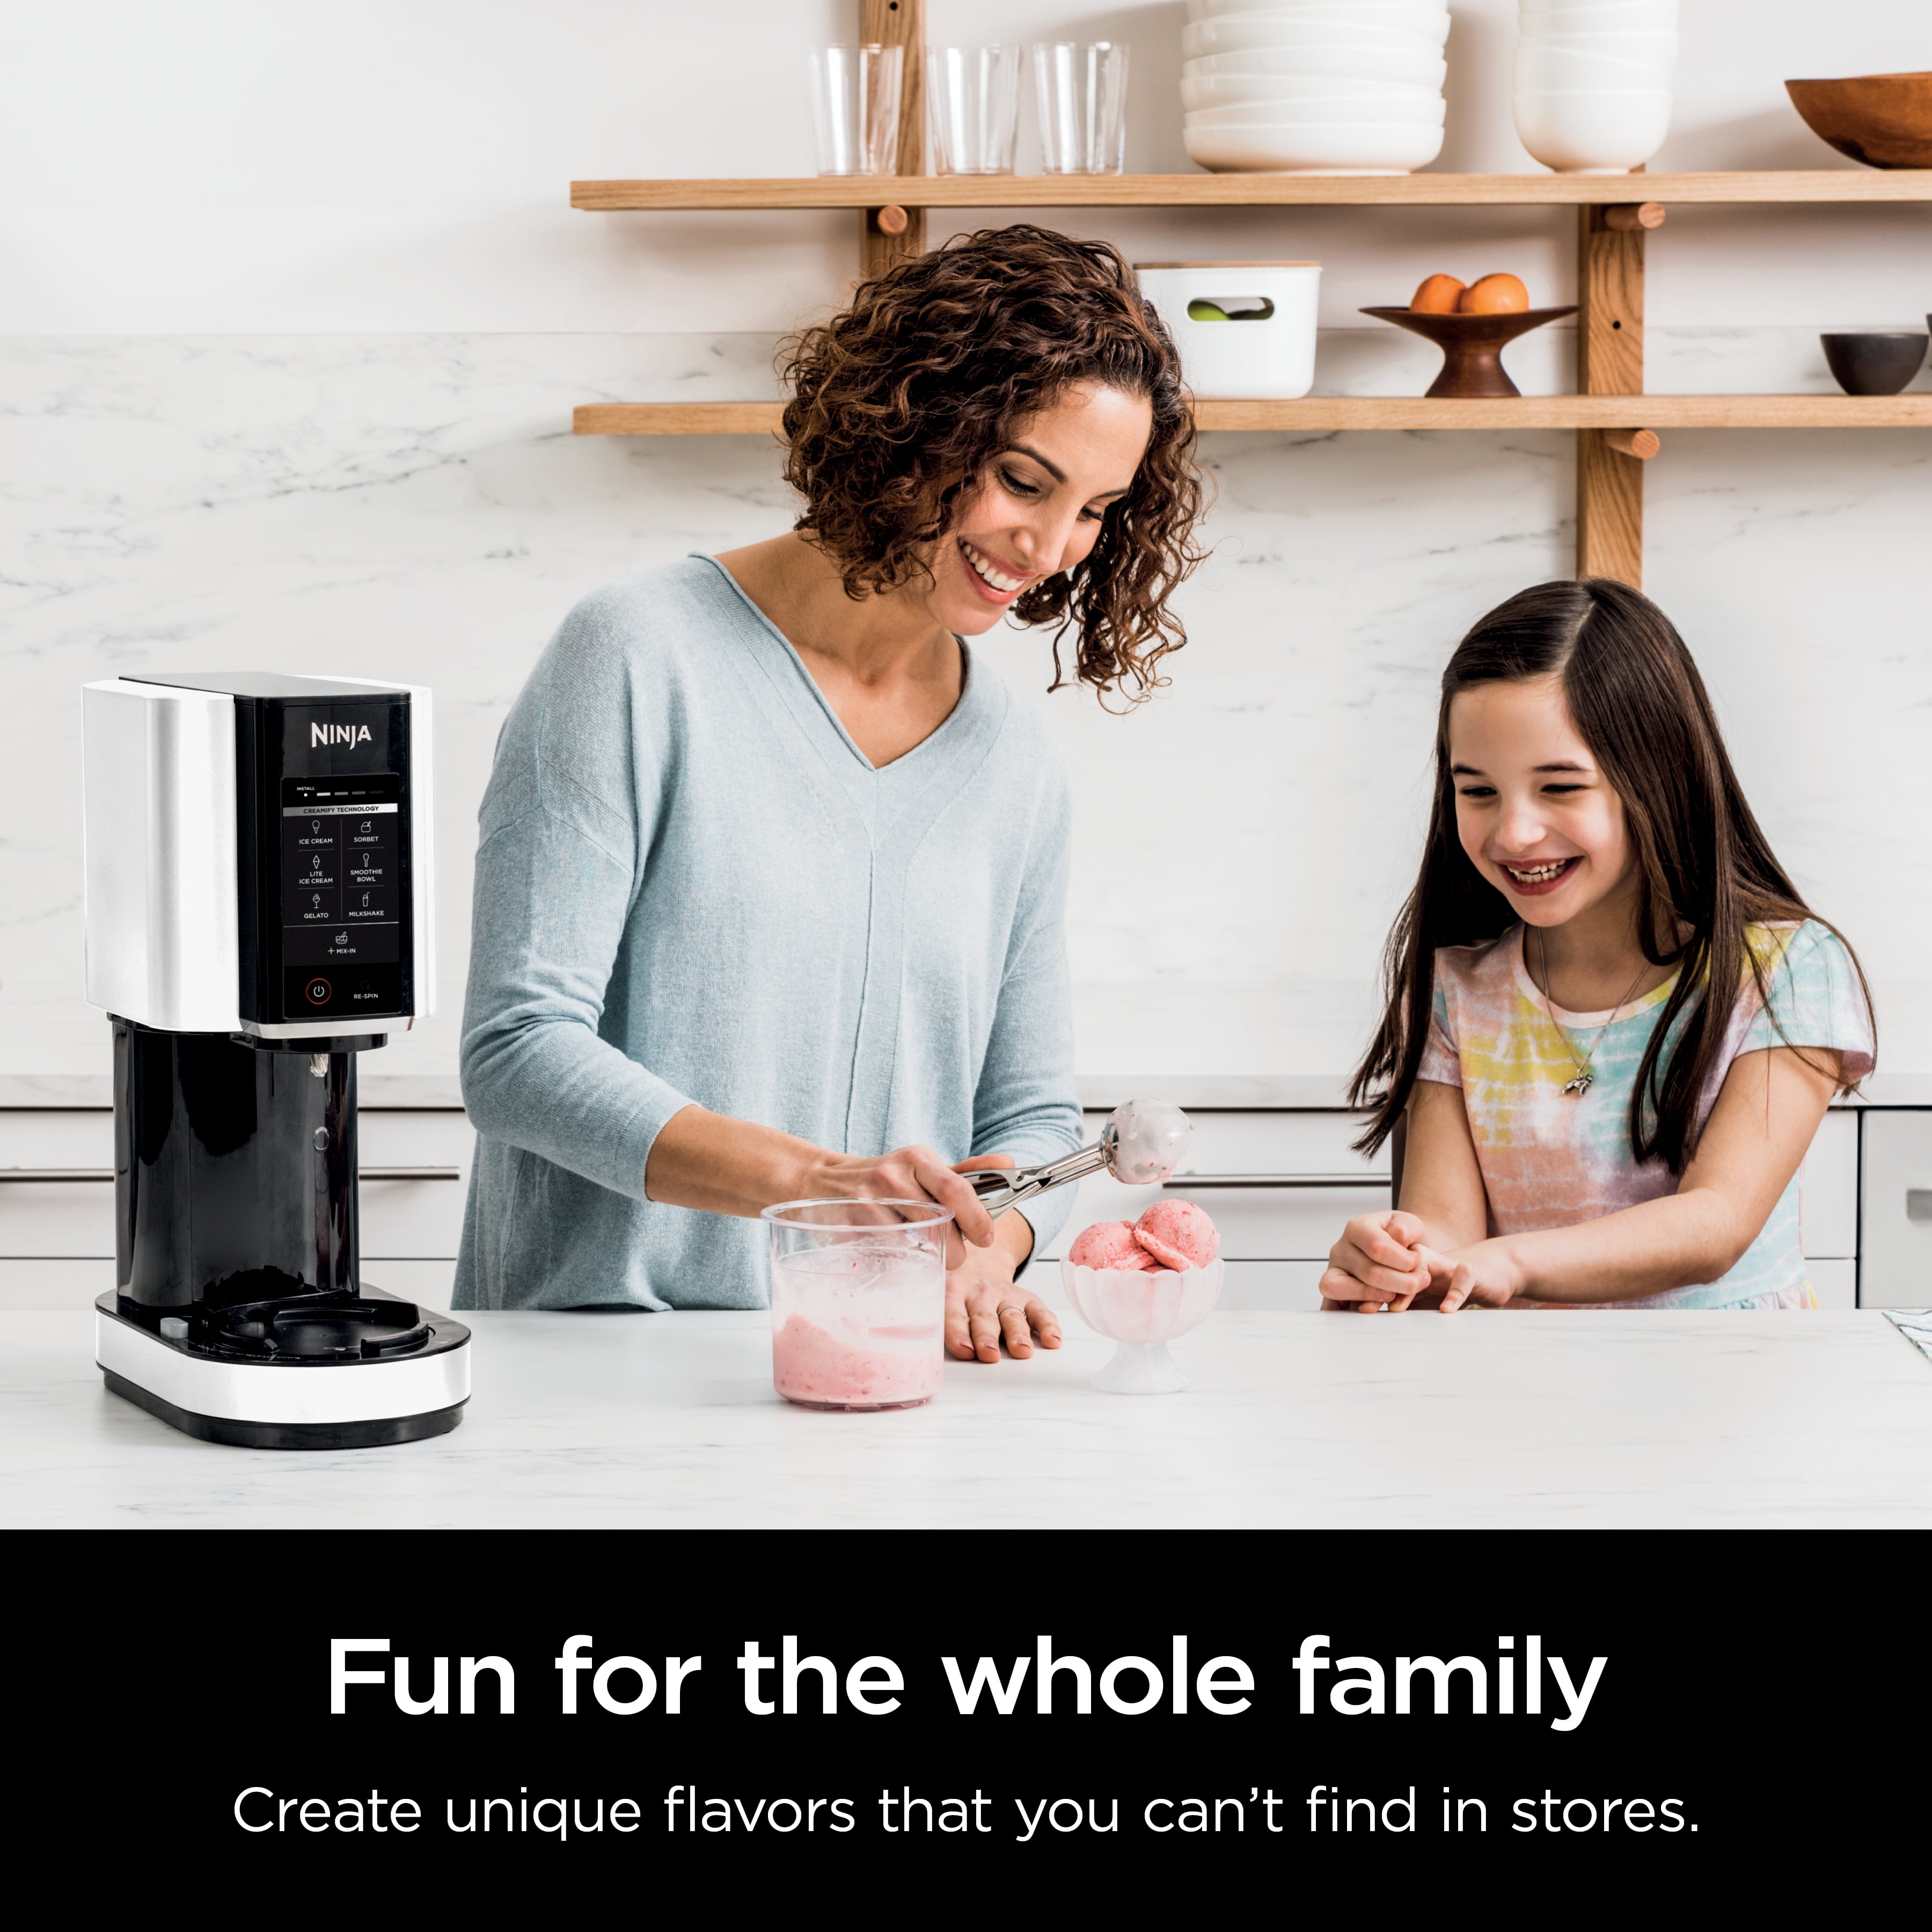 Ninja™ CREAMi™ Ice Cream Maker, 5 One-Touch Programs, with 4 Pints Included